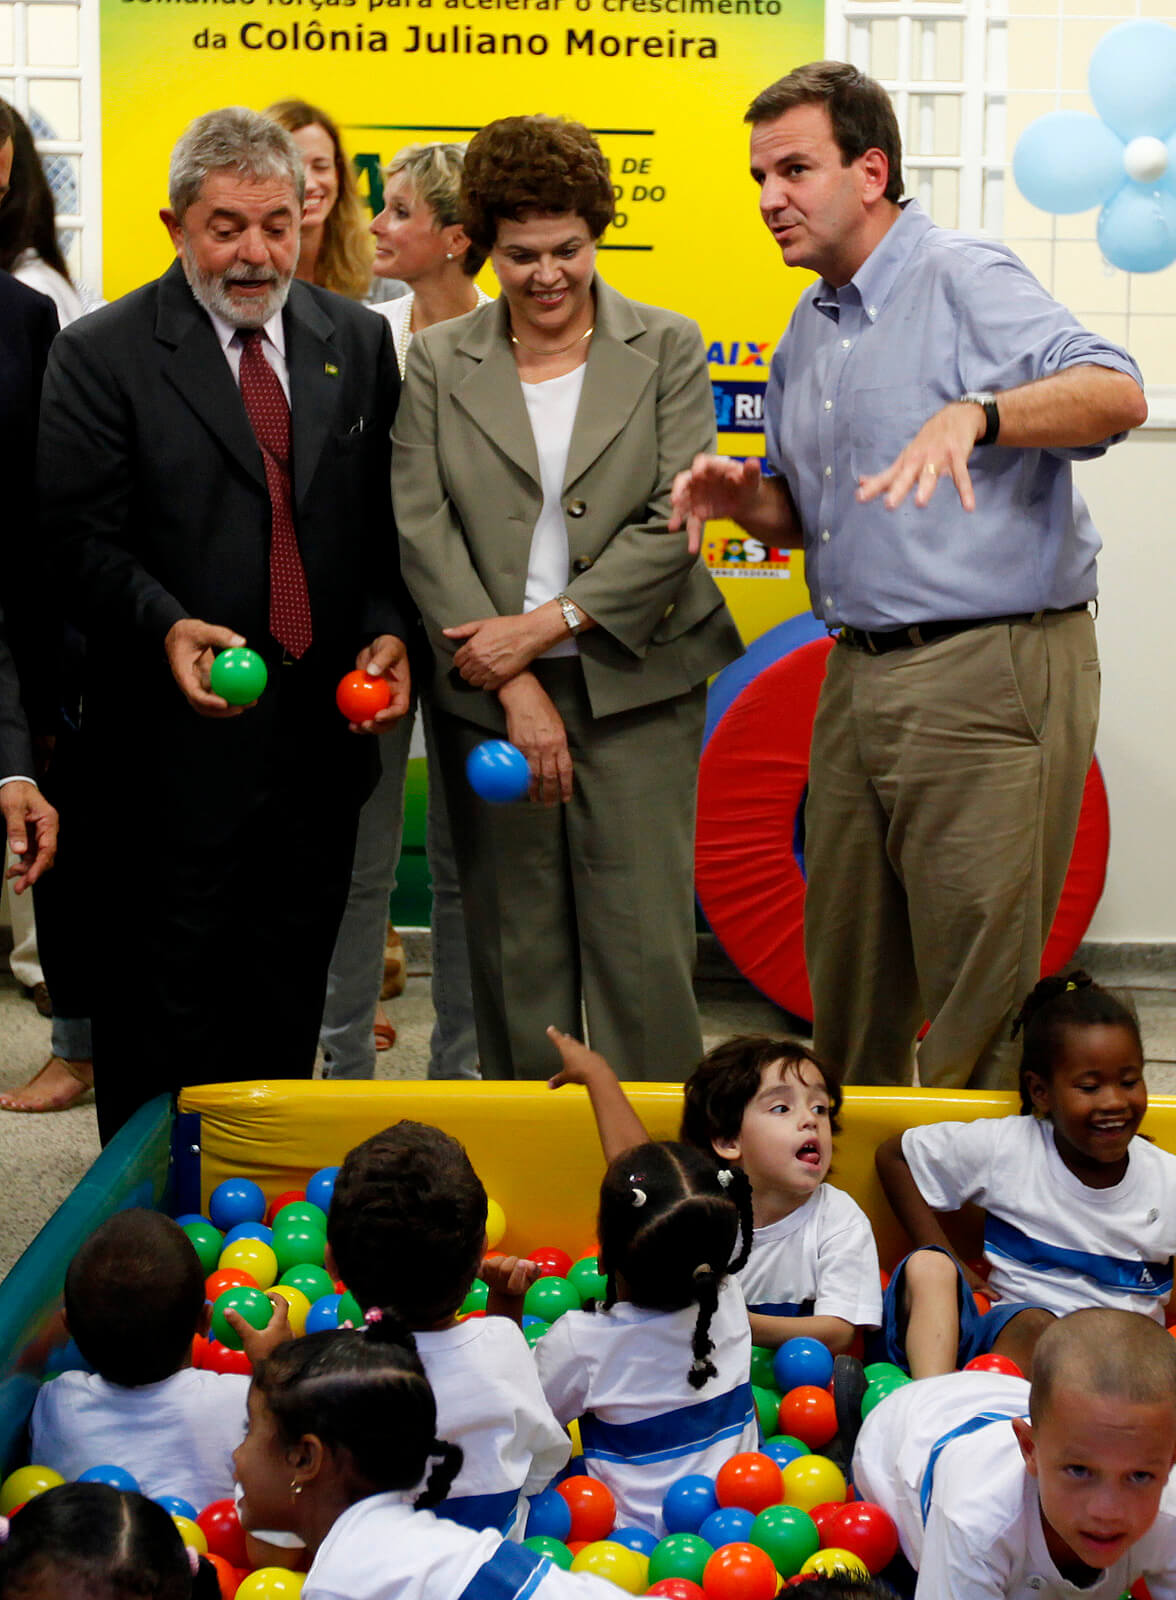 Brazil's President Lula da Silvia, left, chief of Staff Dilma Rousseff, center, and Rio's Mayor Eduardo Paes, play with kids before Lula inaugurated a project as part of a Growth Acceleration Program in Rio de Janeiro, Jan. 25, 2010. Felipe Dana | AP